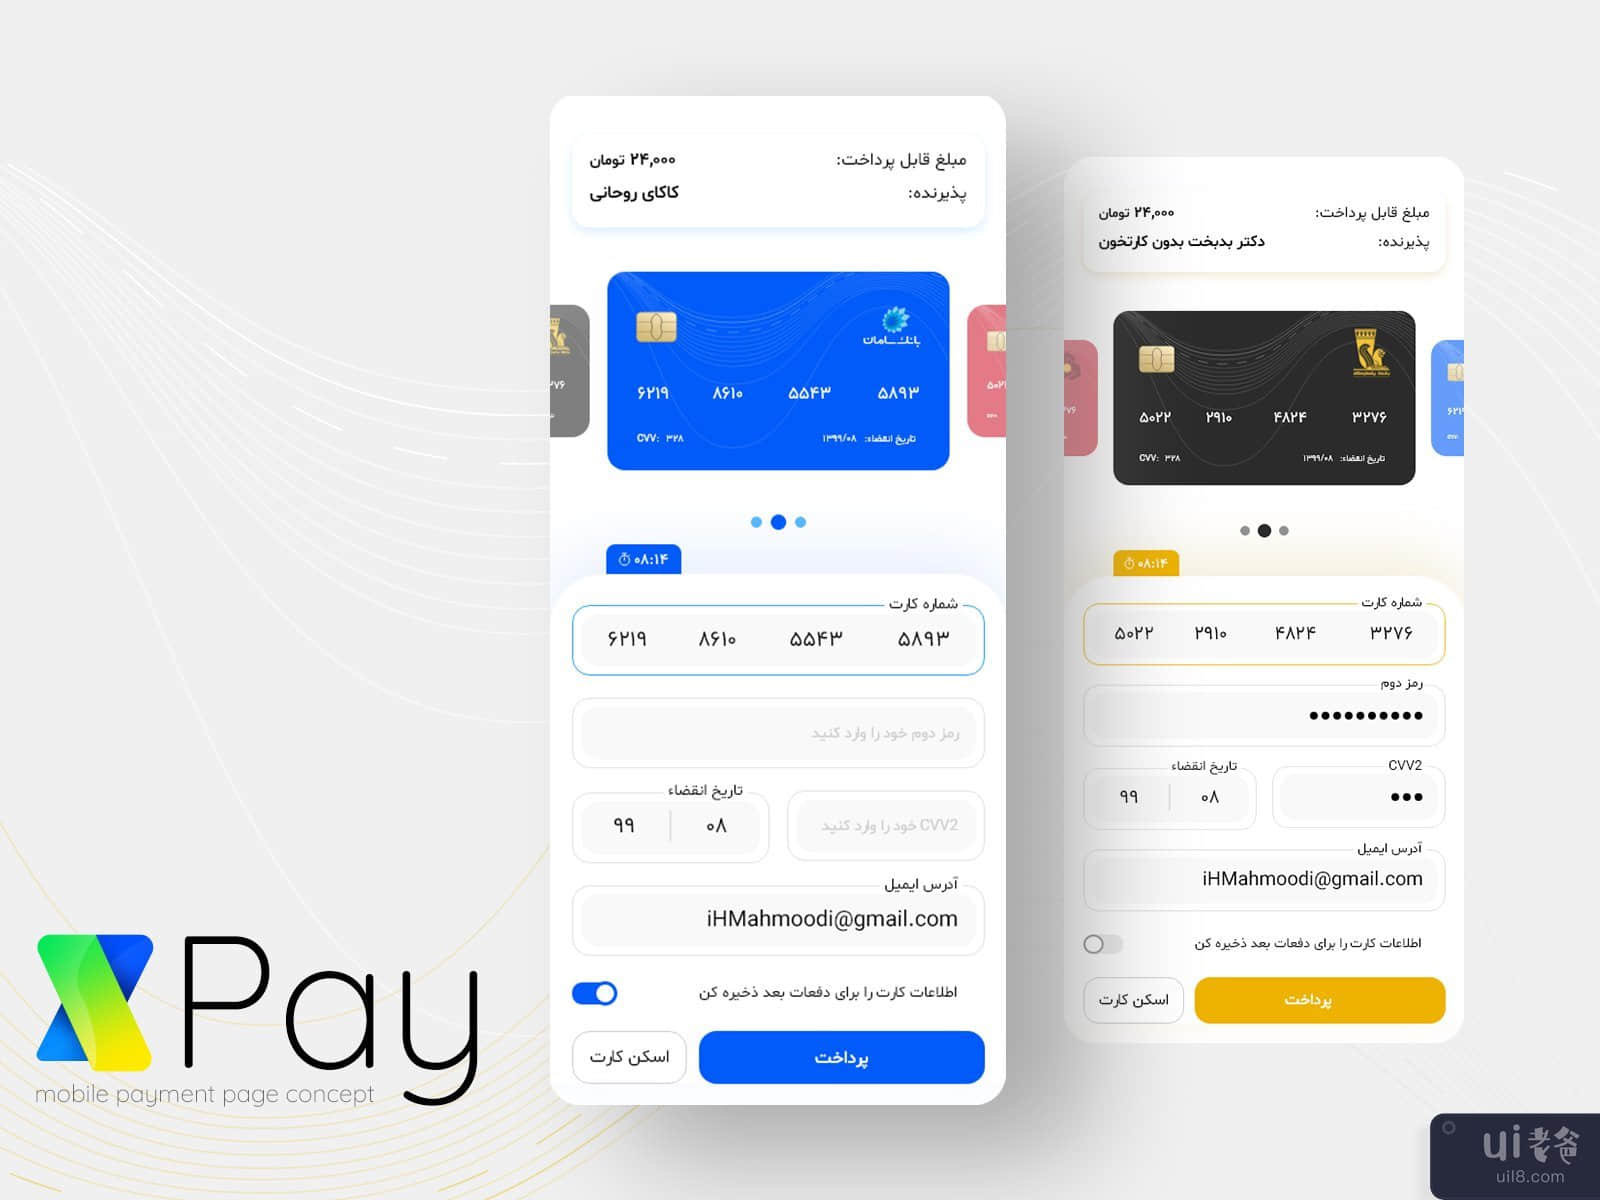 XPay - 移动支付应用程序(XPay - Mobile Payment App)插图1